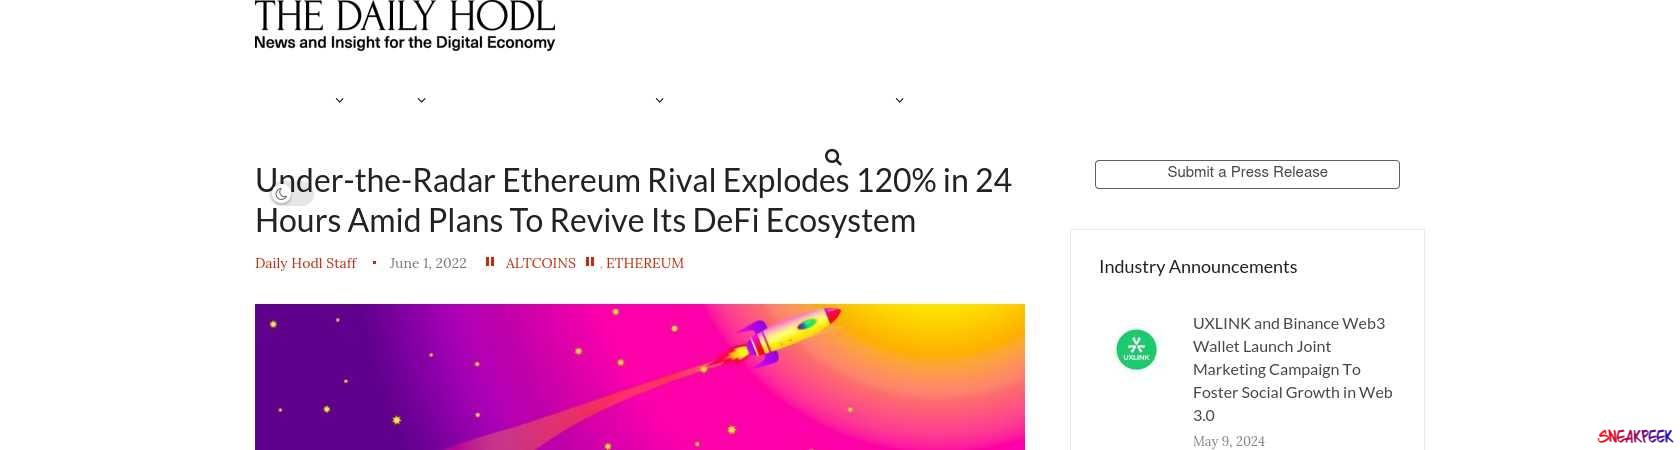 Read the full Article:  ⭲ Under-the-Radar Ethereum Rival Explodes 120% in 24 Hours Amid Plans To Revive Its DeFi Ecosystem